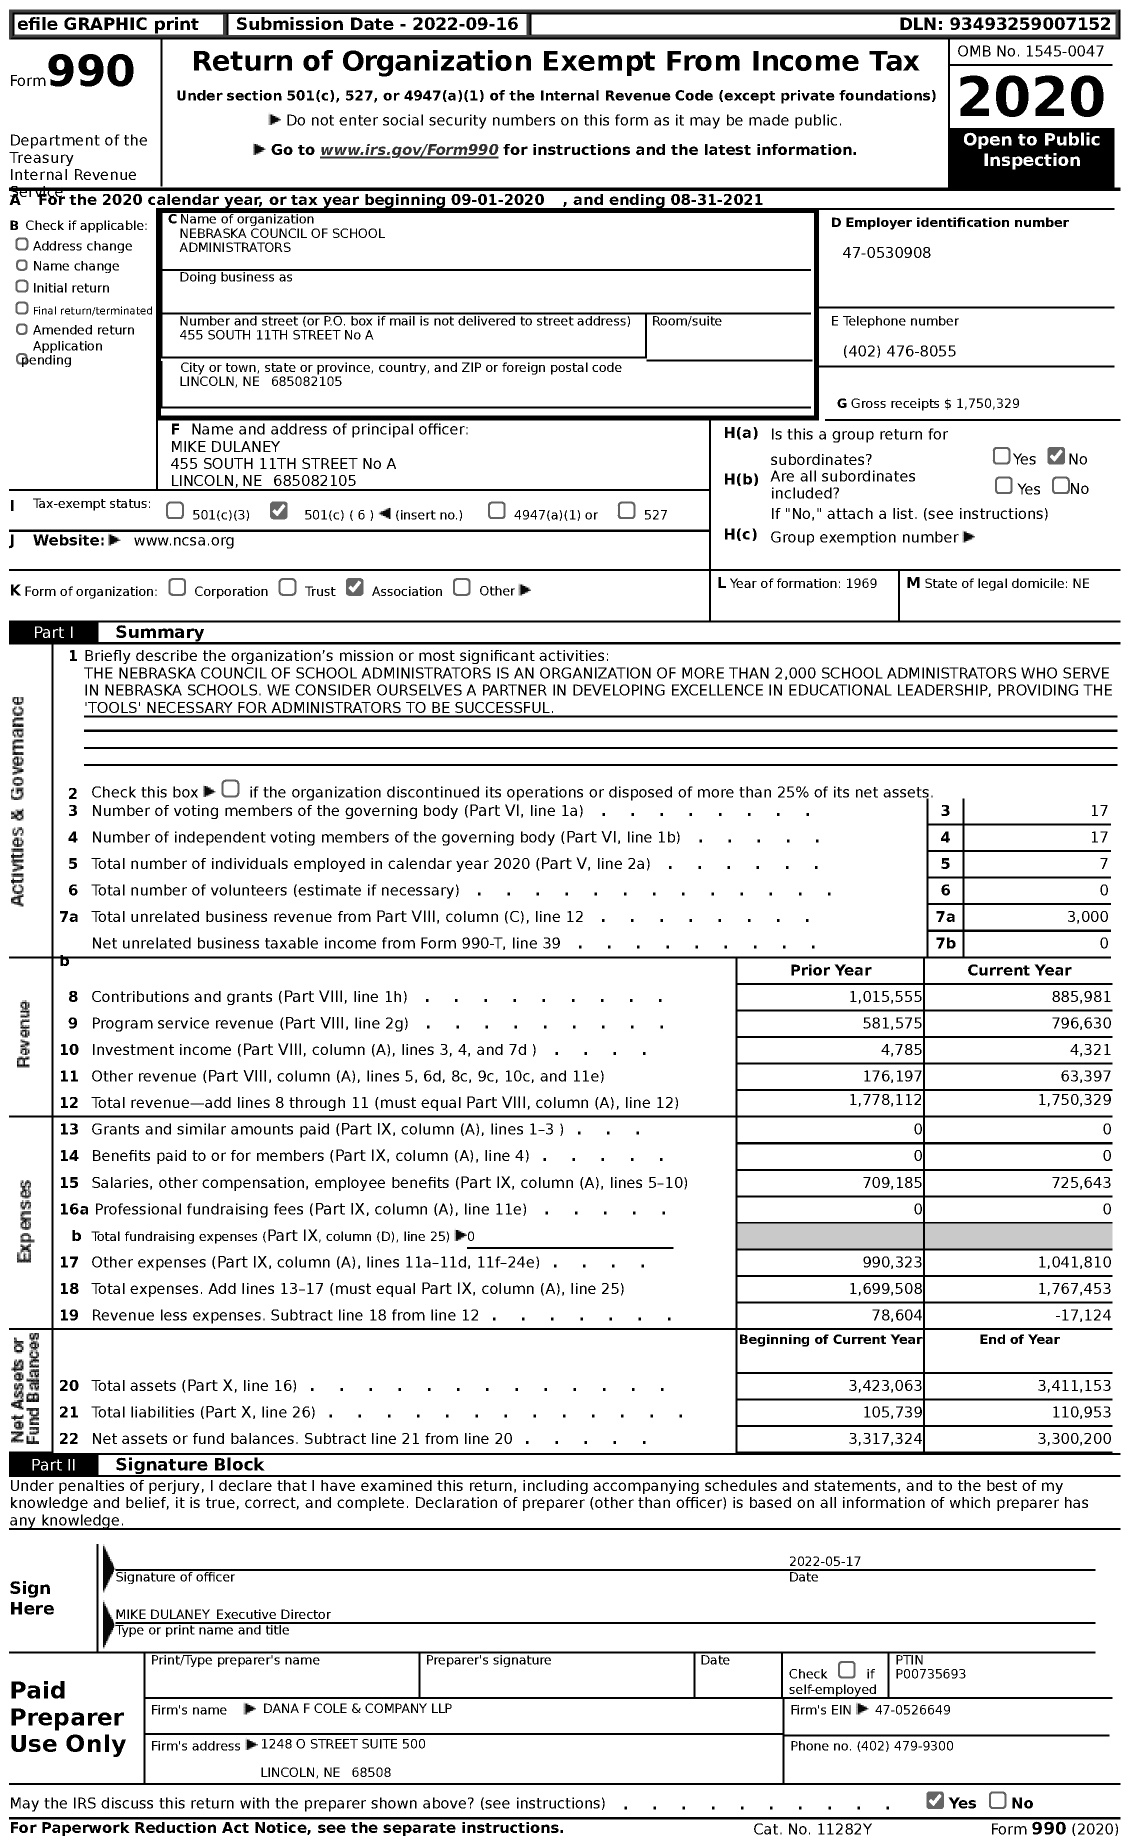 Image of first page of 2020 Form 990 for Nebraska Council of School ADMINISTRATORS (NCSA)